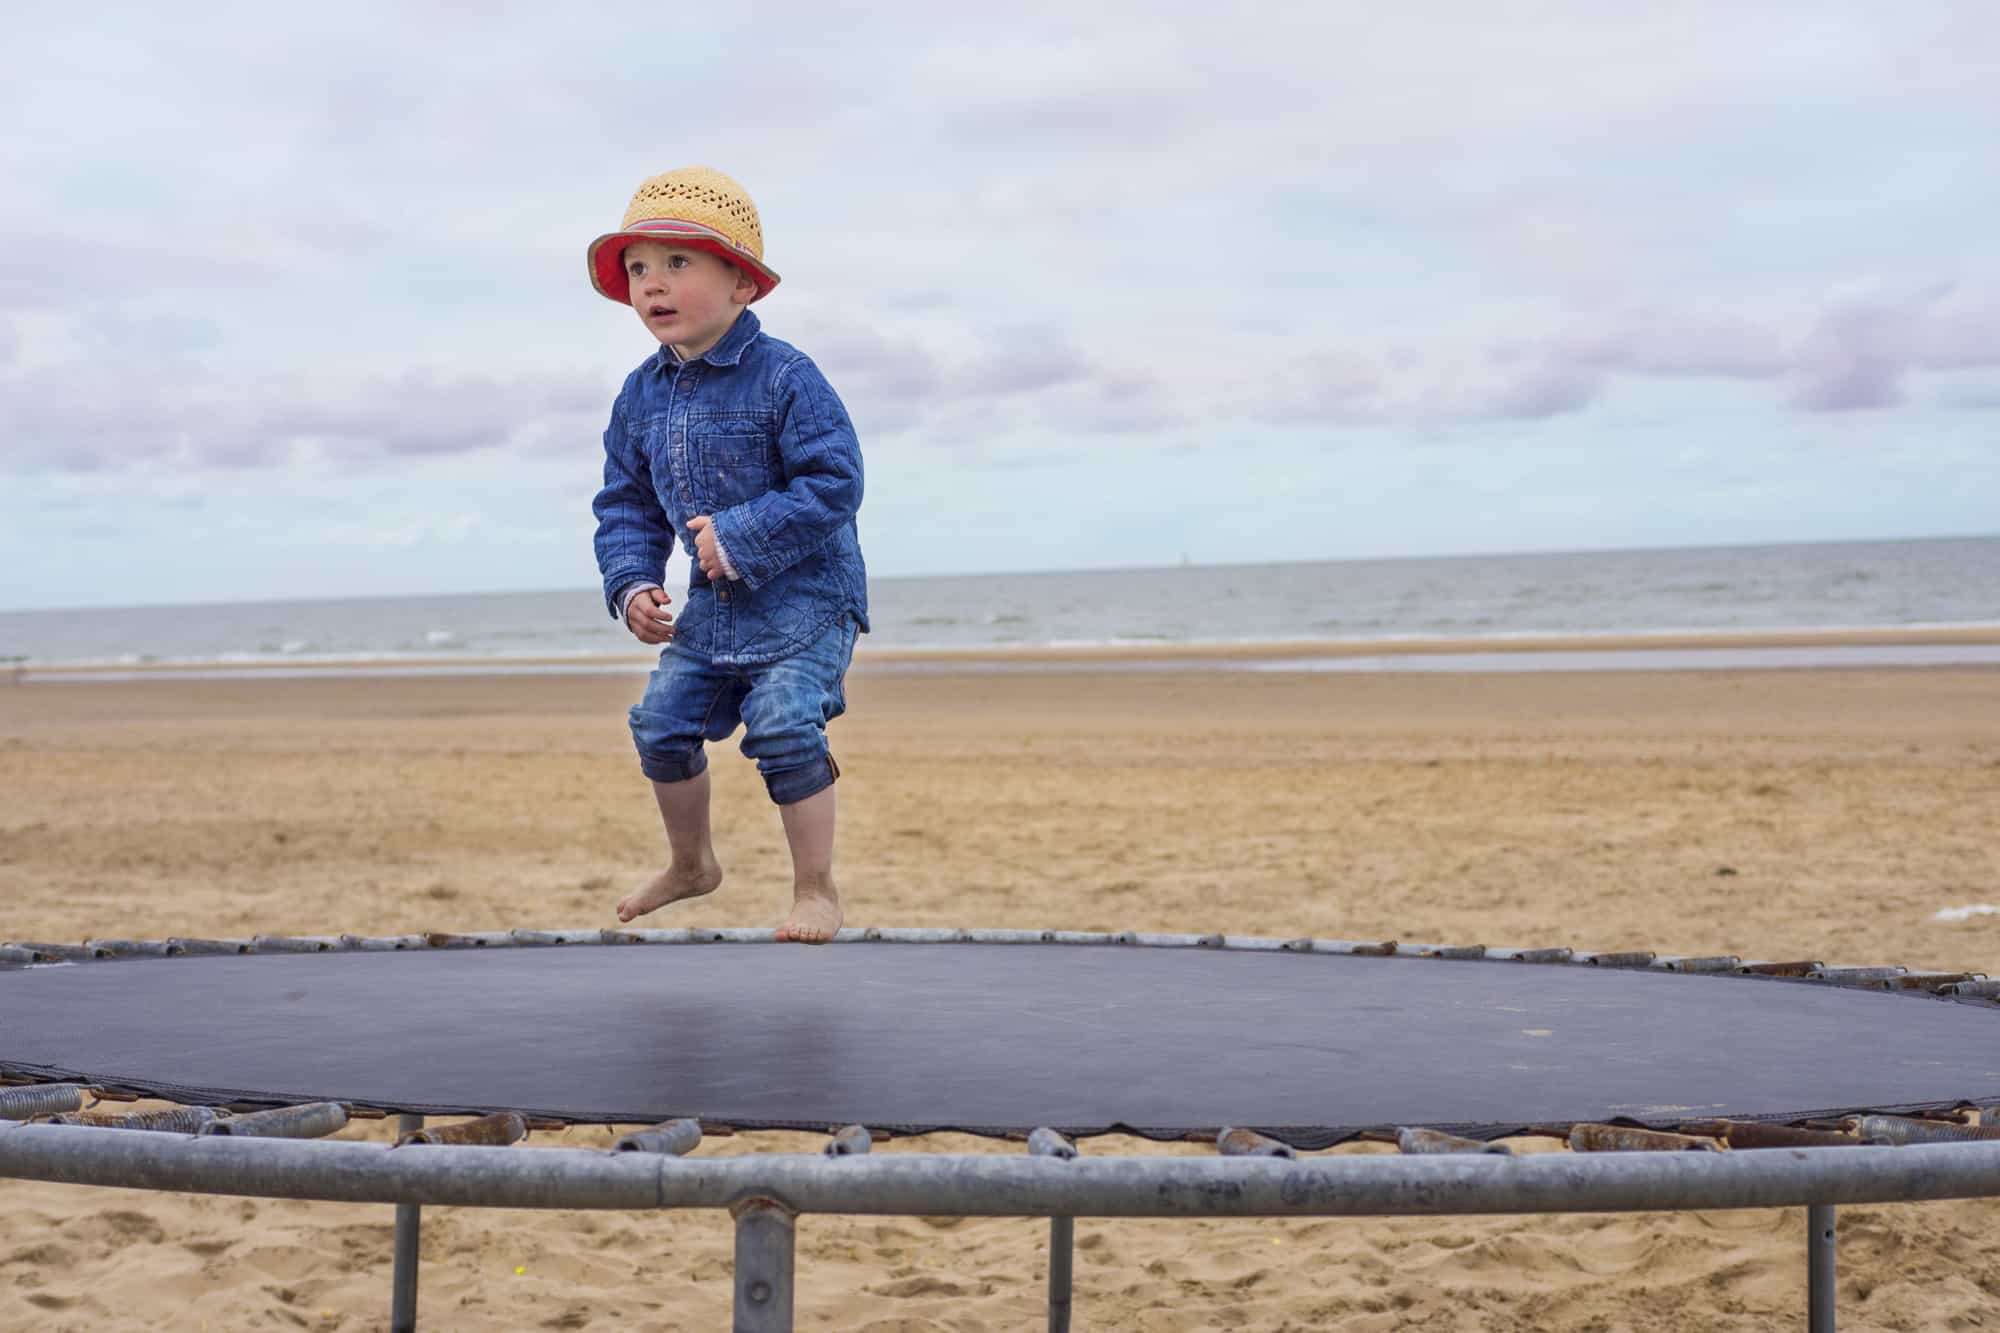 A child apprximately 2-year old jumping on a trampoline on a beach with water in background